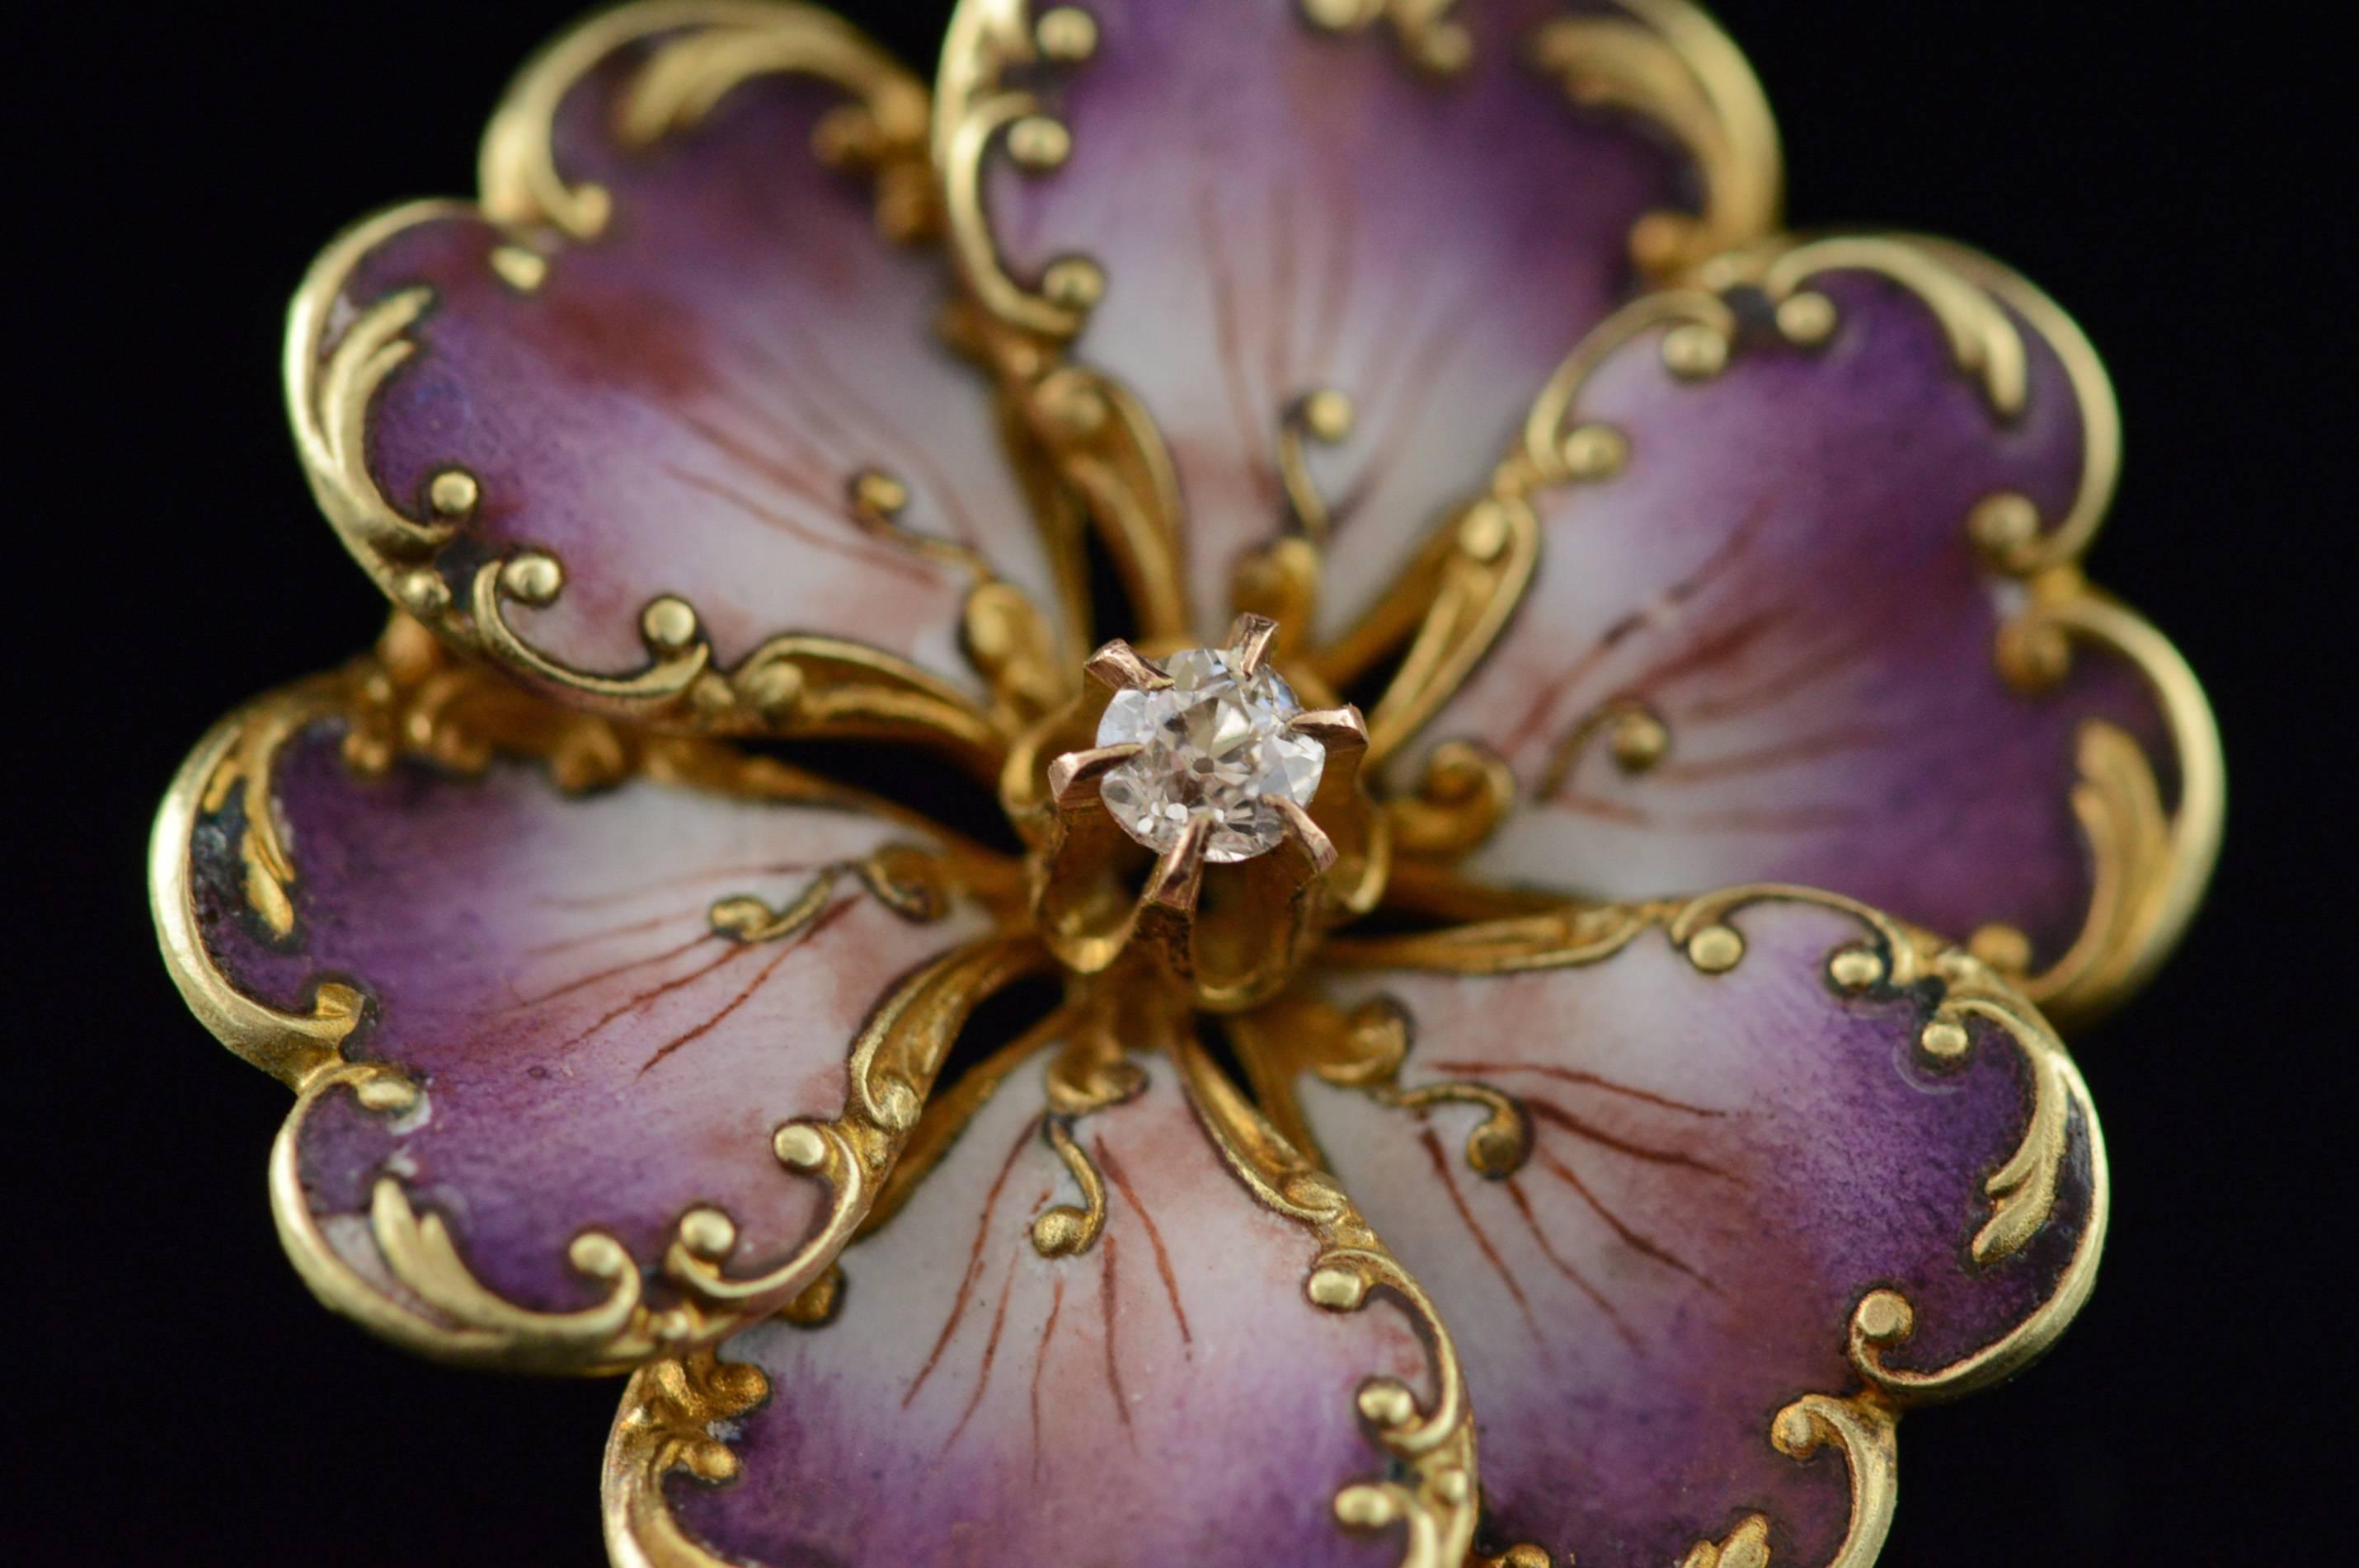 All diamonds are graded according to GIA grading standards. (When applicable)

·Item: 14K French Purple Pink Enameled & Old Mine Cut Diamond Pin/Brooch 22mm Yellow Gold

·Era: Turn of the century / 1900s

·Composition: 14k Gold Acid